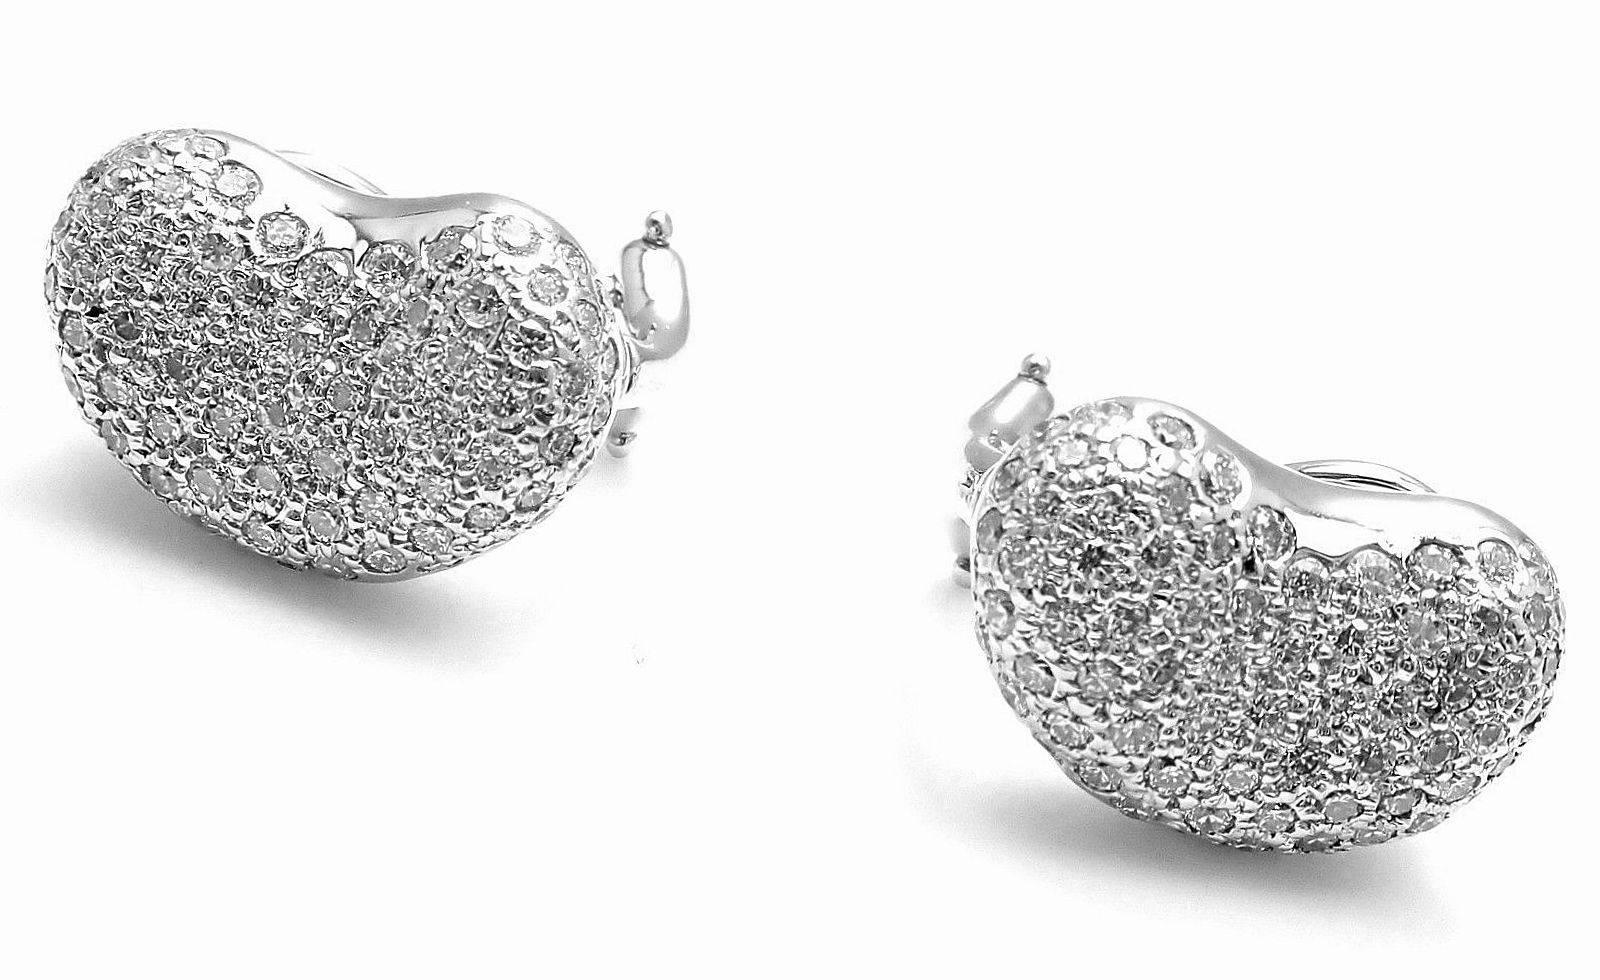 Platinum Diamond Bean Earrings by Elsa Peretti for Tiffany & Co.
With Approx. 160 round brilliant cut diamonds VS1 clarity G color total weight 1.50ct
These earrings are for pierced ears
Measurements: 10mm x 15mm
Weight: 14.5 grams
Signed Hallmarks: